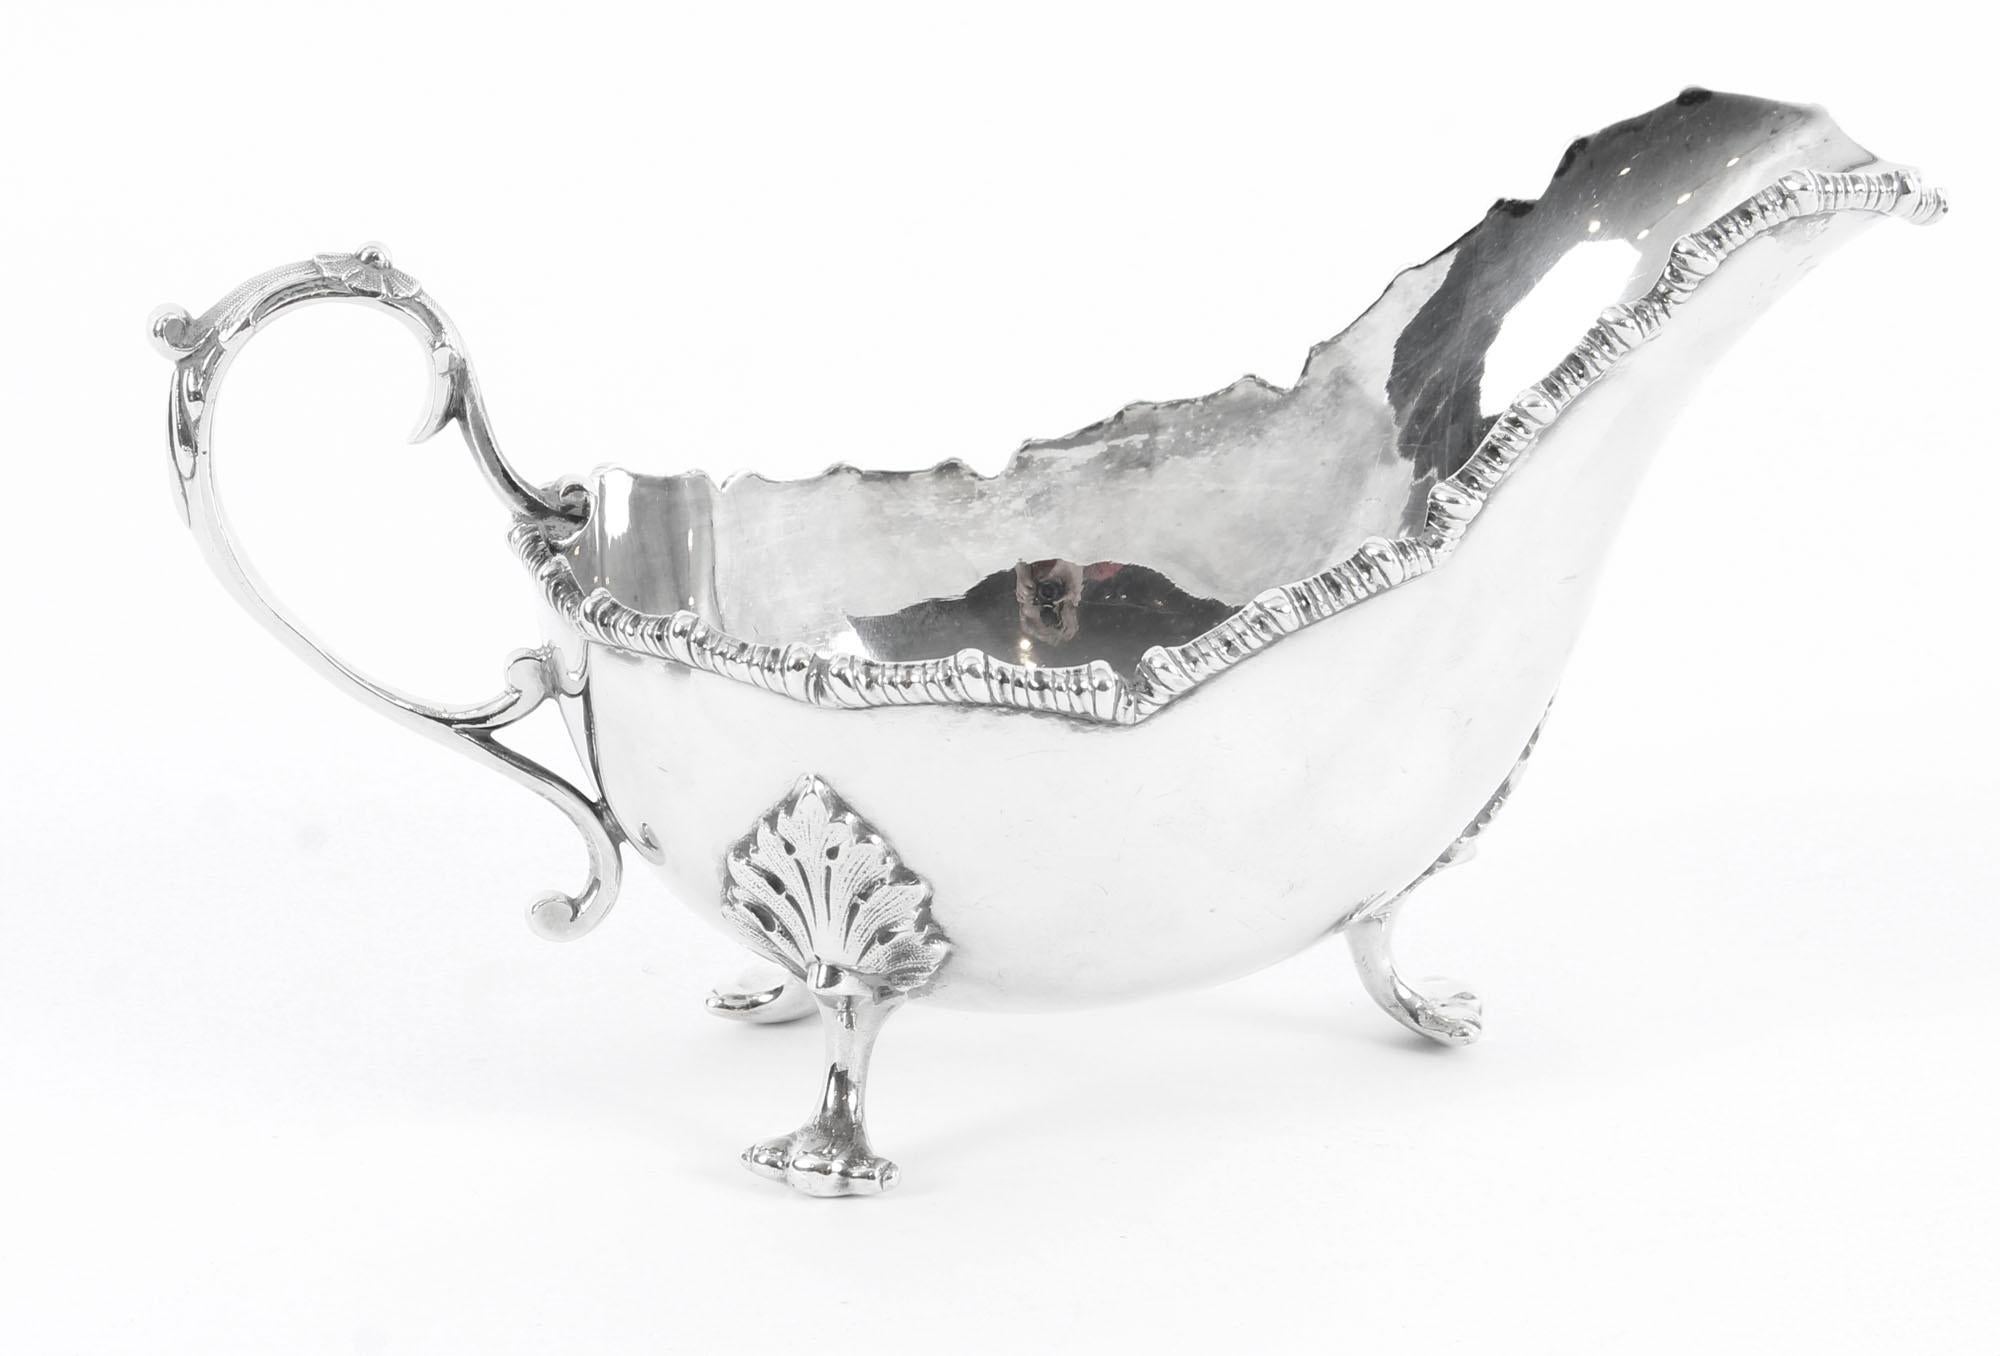 Victorian Antique English Silver Plated Sauce Boats James Dixon & Sons 19th Century, Pair